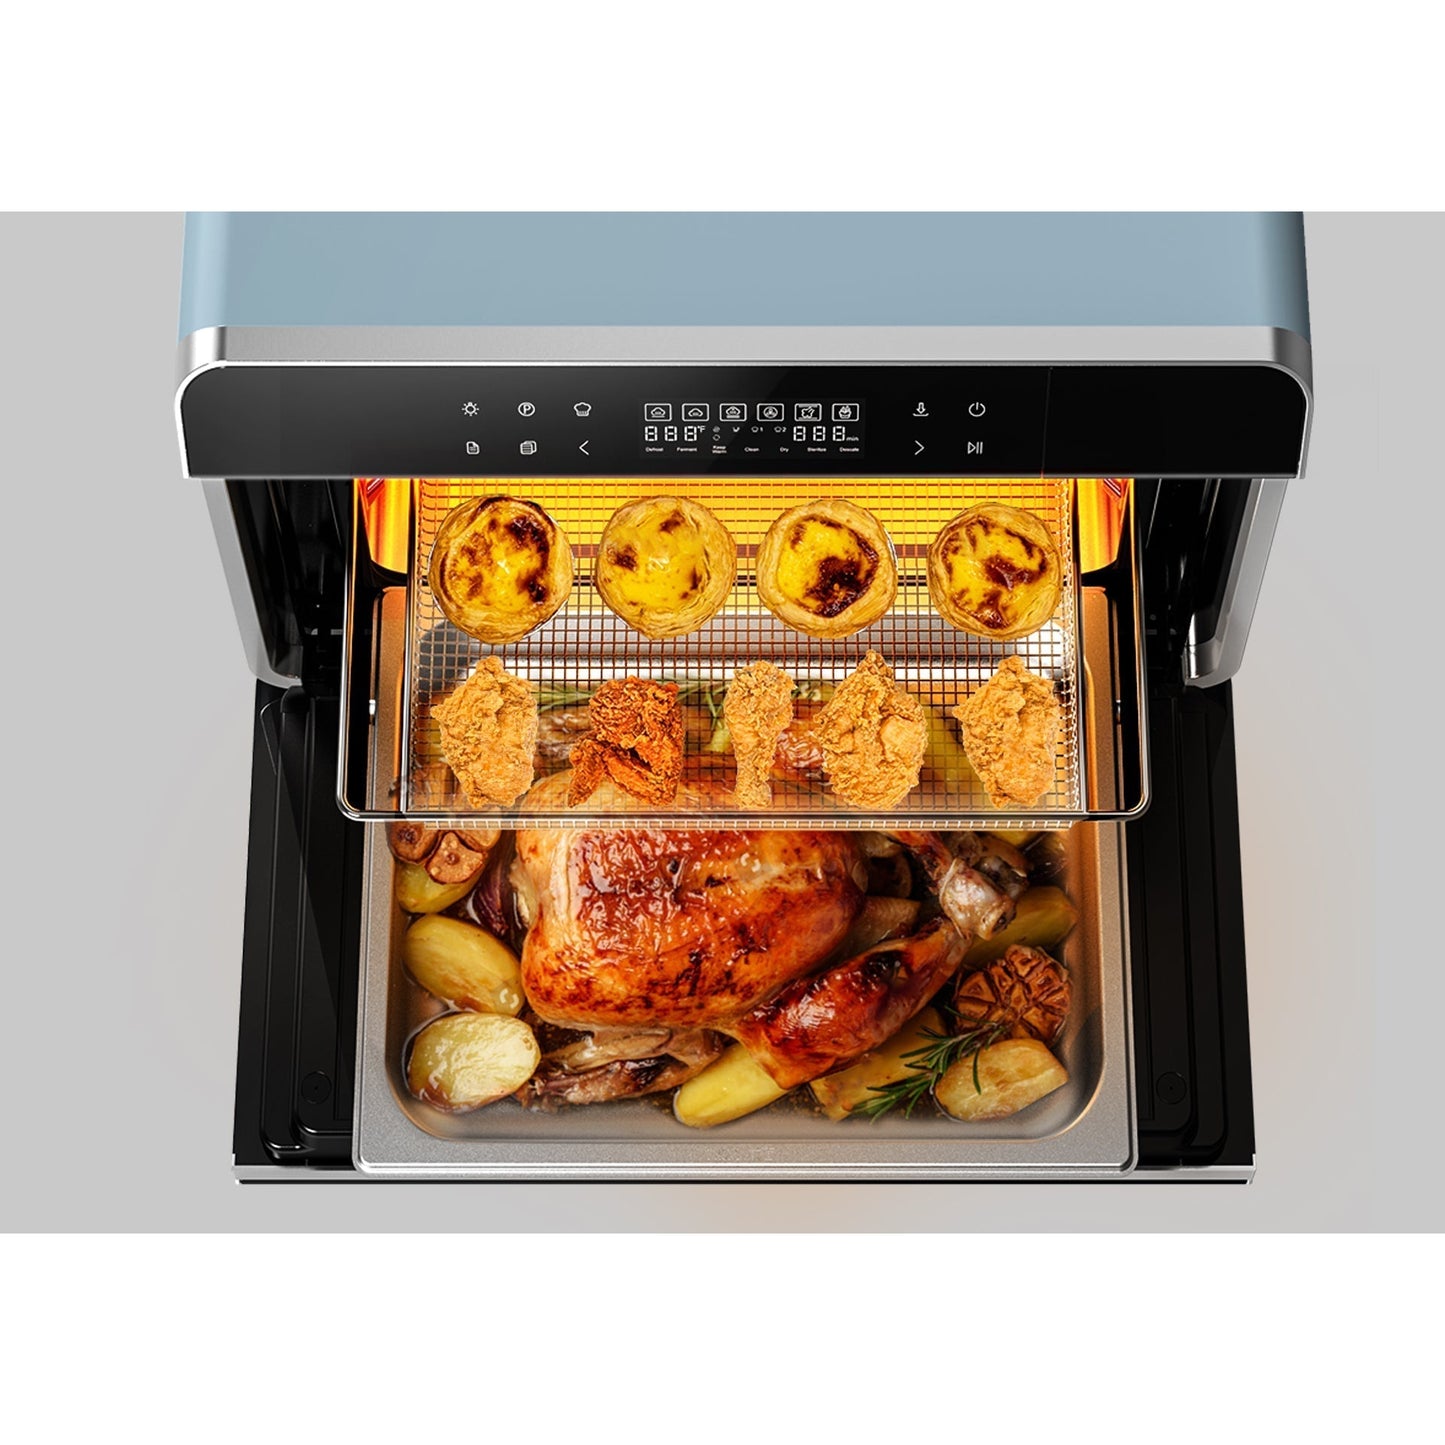 Robam R-Box 20-in-1 Seasalt Blue Combi Steam Oven With External Water Tank and LED Display